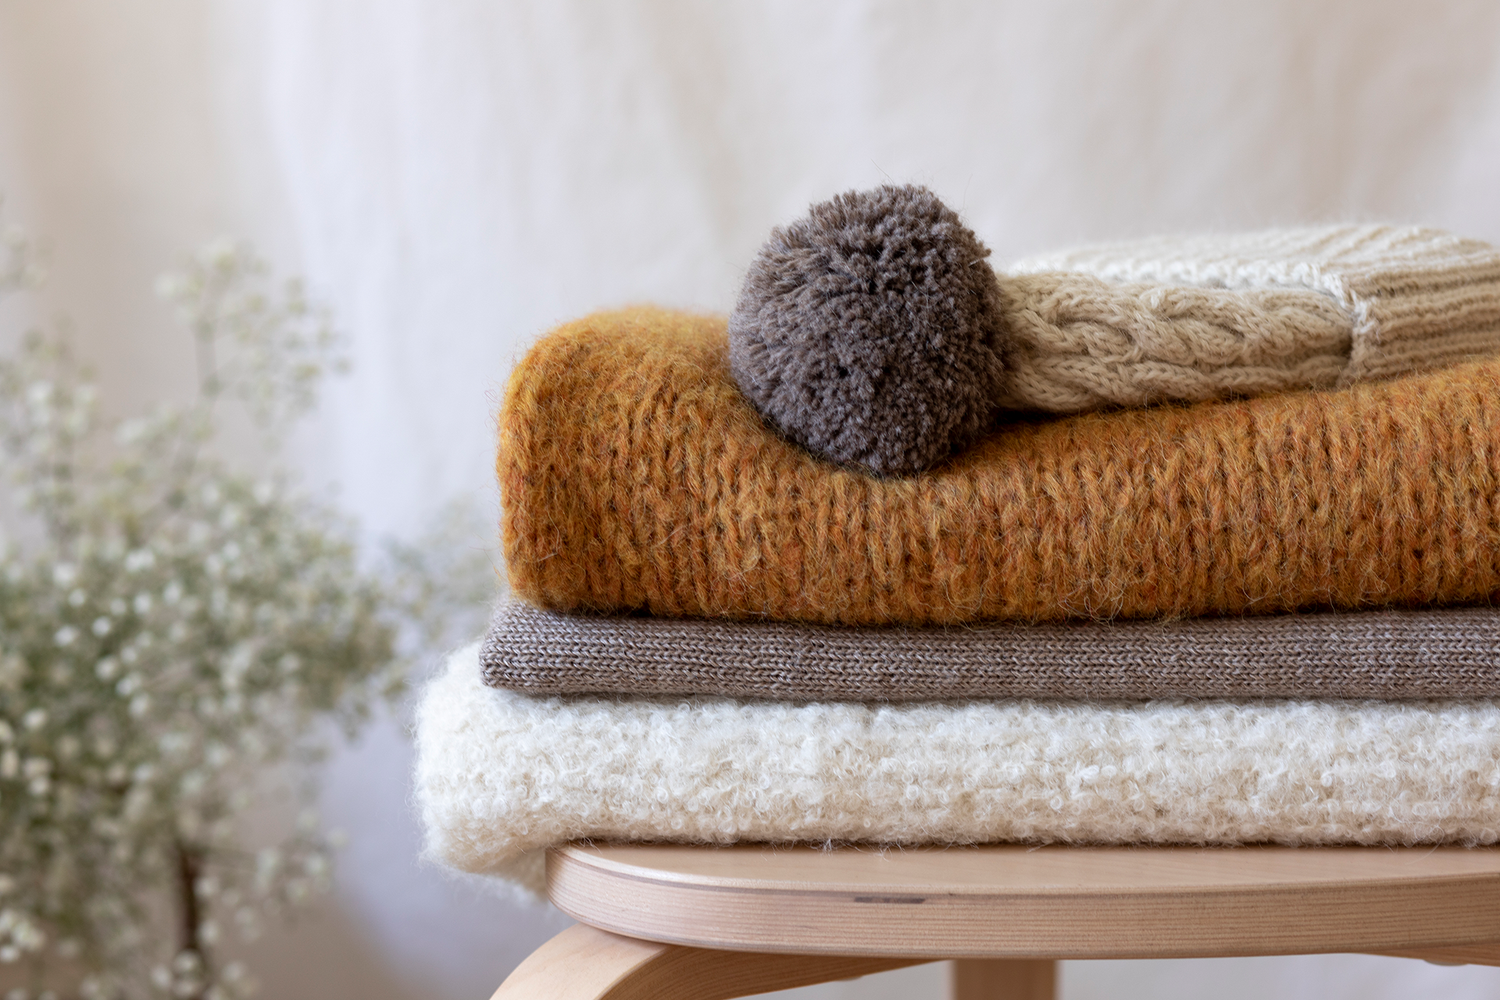 Premium hand-knitted scarf and hat on stool 